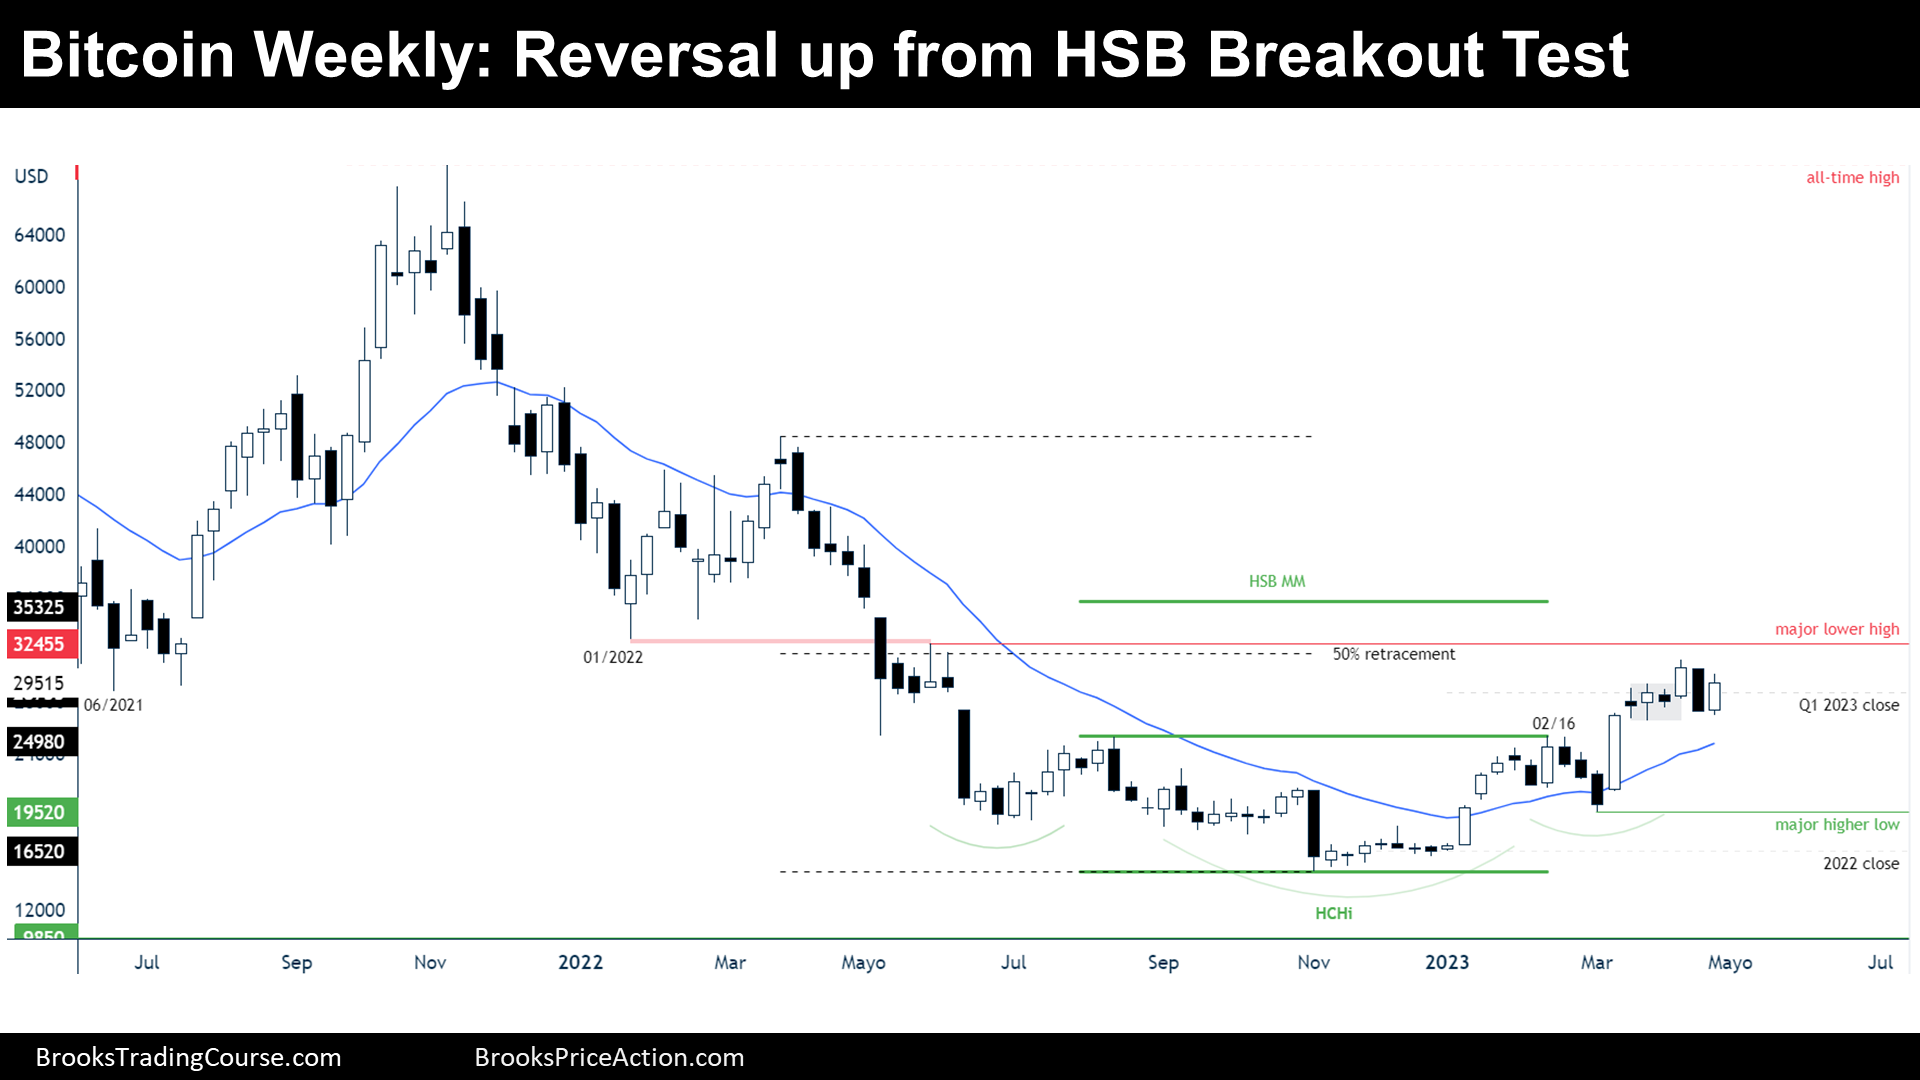 Bitcoin Weekly Chart Reversal Up from HSB Breakout Test